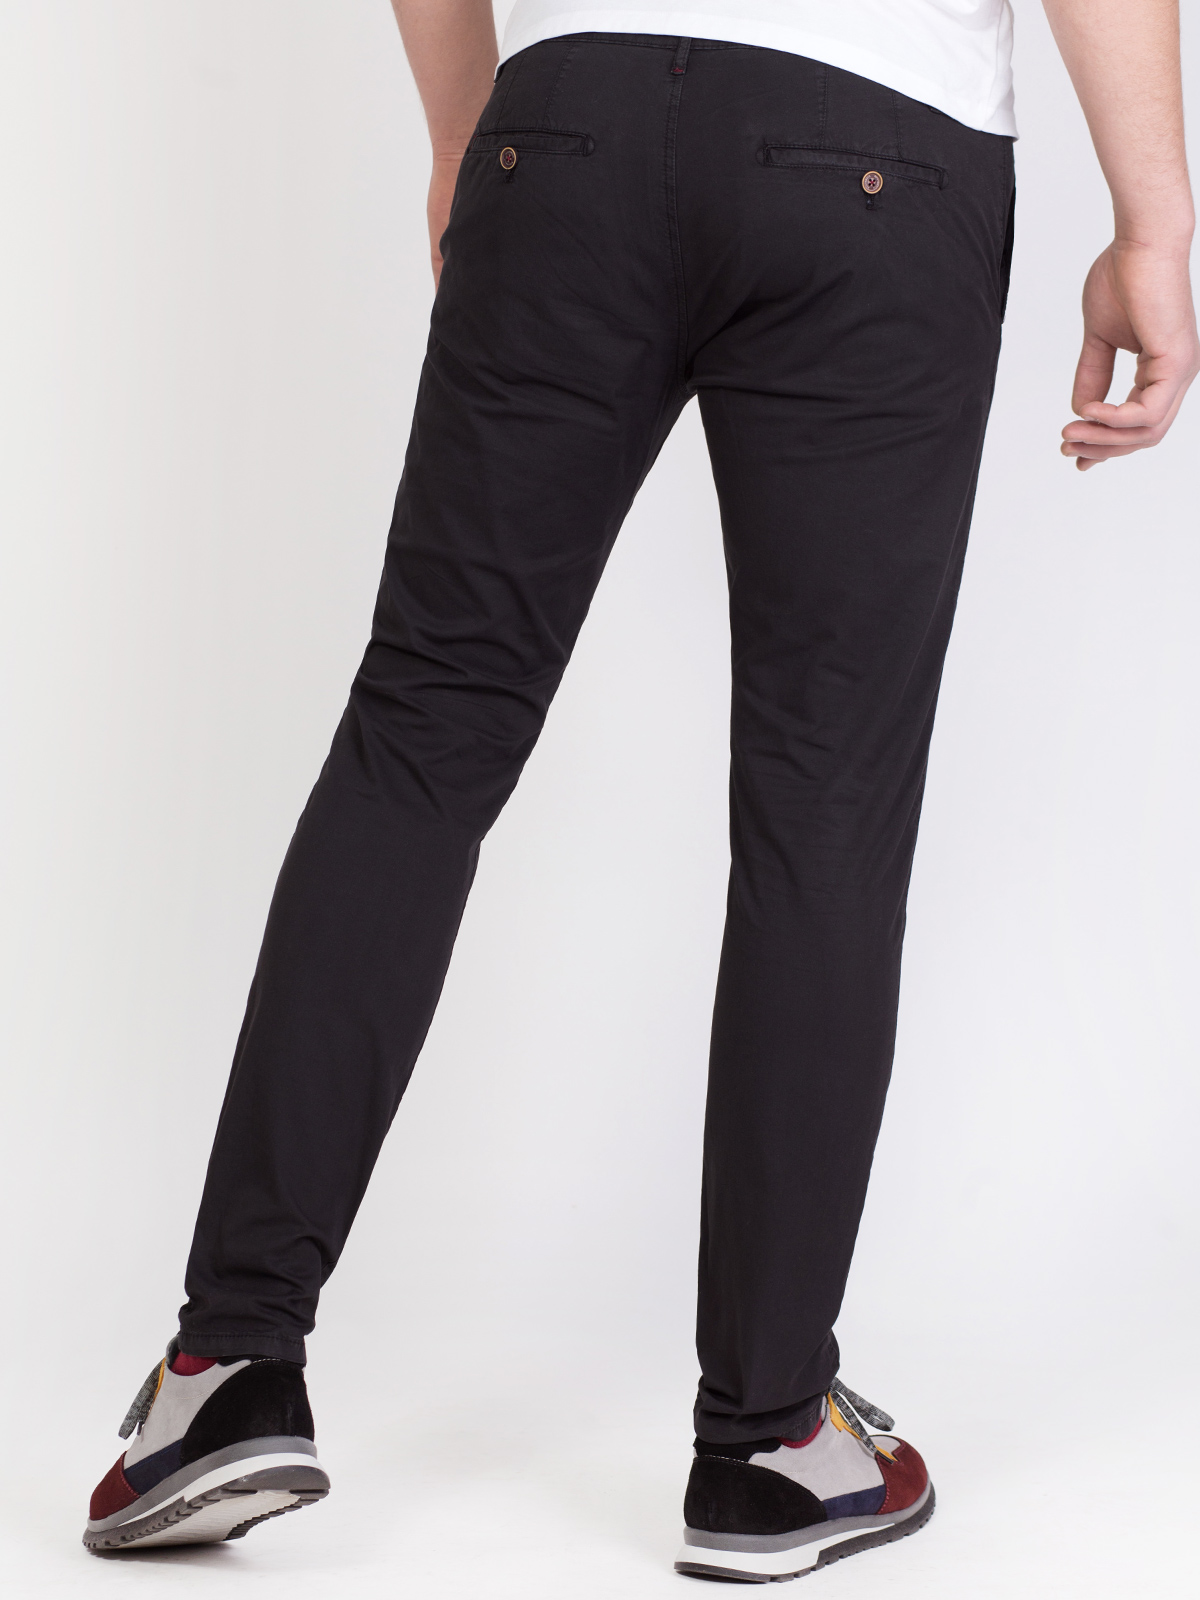 Black trousers with fitted silhouette - 63314 € 44.43 img3